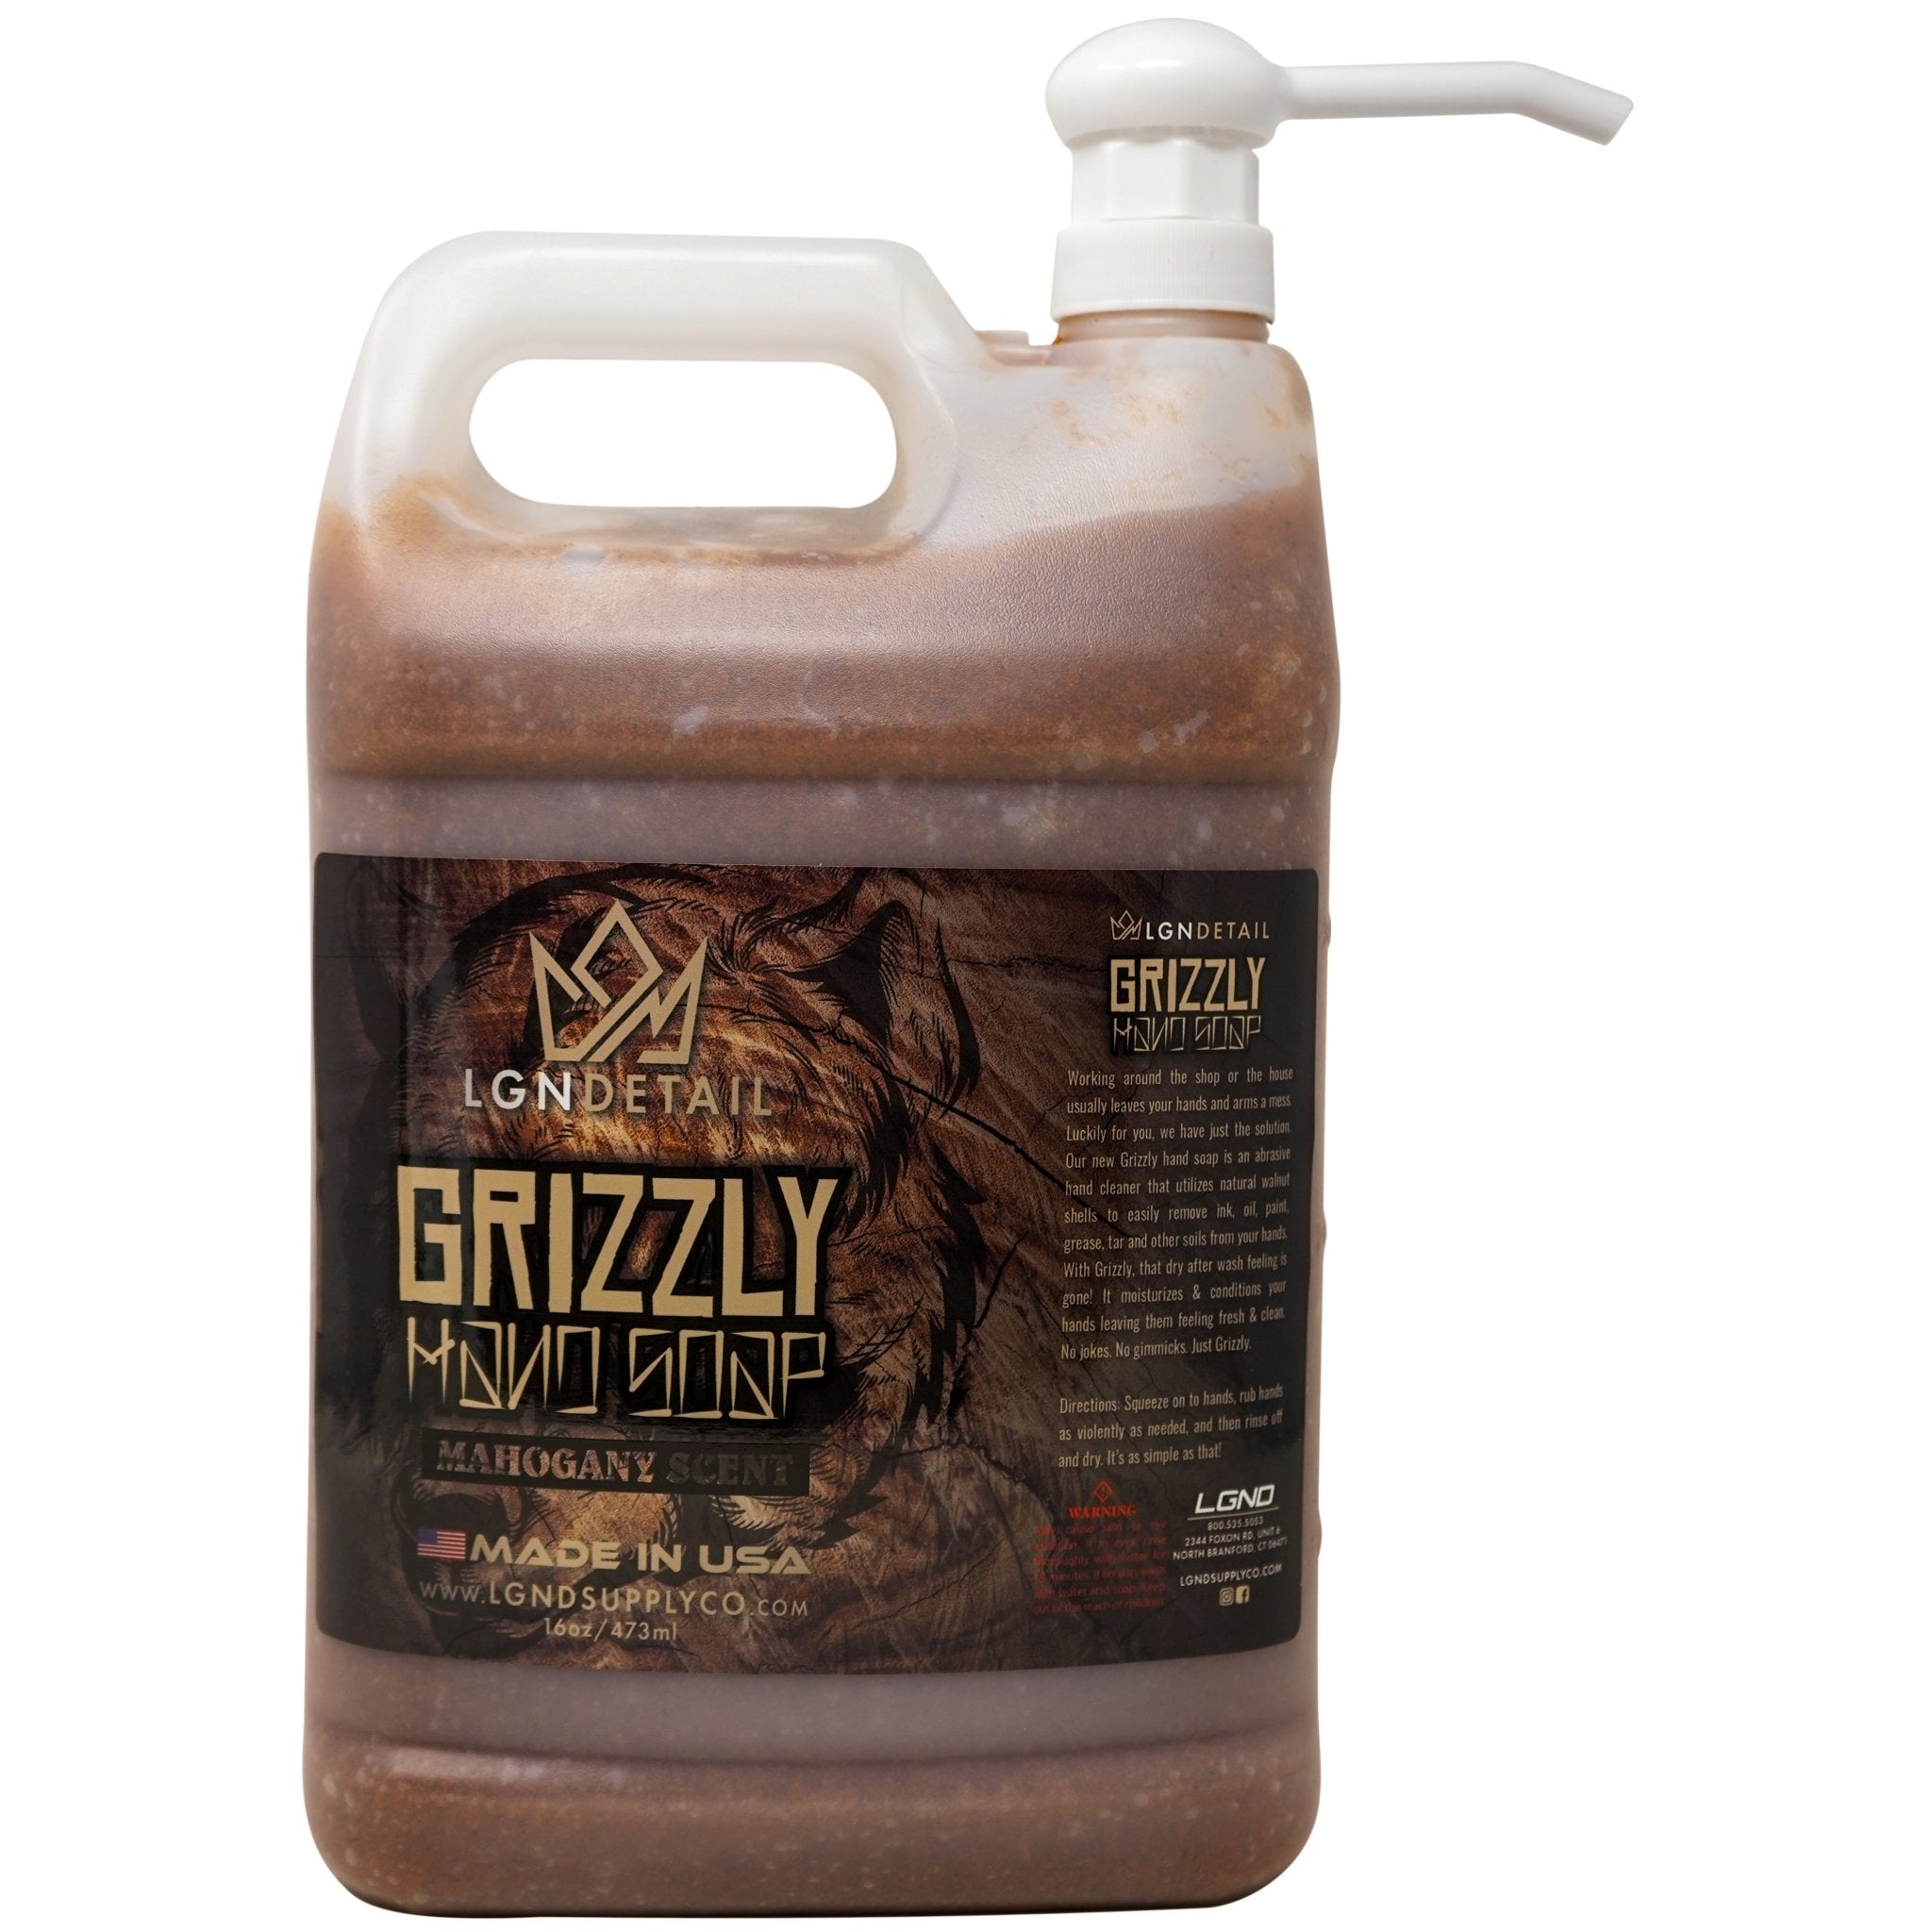 Grizzly Handsoap - Gallon - LGND SUPPLY CO.